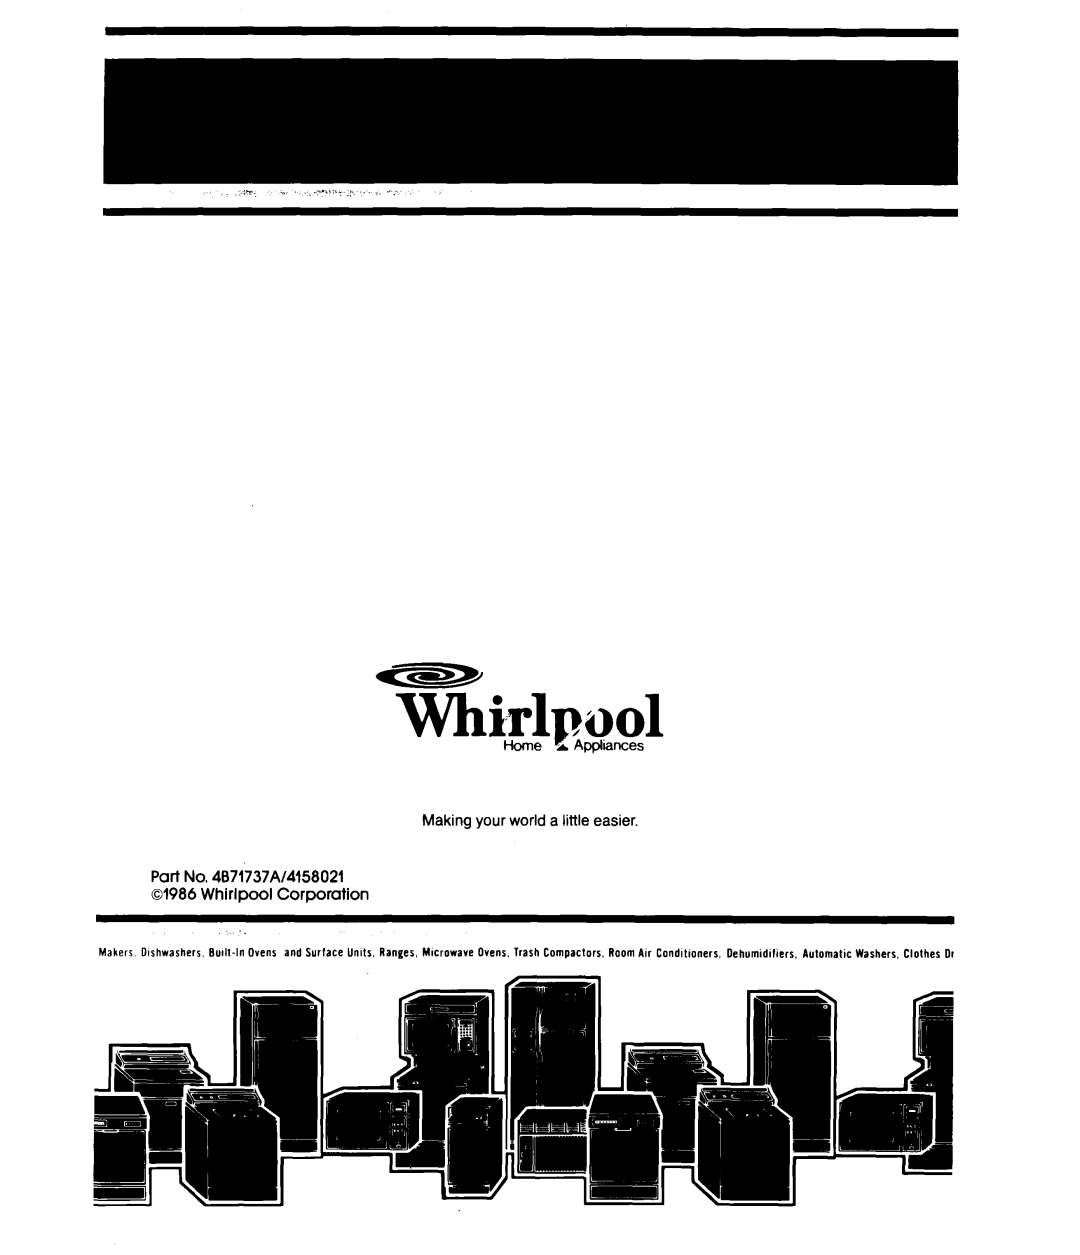 Whirlpool MW32OOXS manual whirlJ?ool HoineA&pliinces, Making your world a little easier, Part No. 4071737A/4158021 